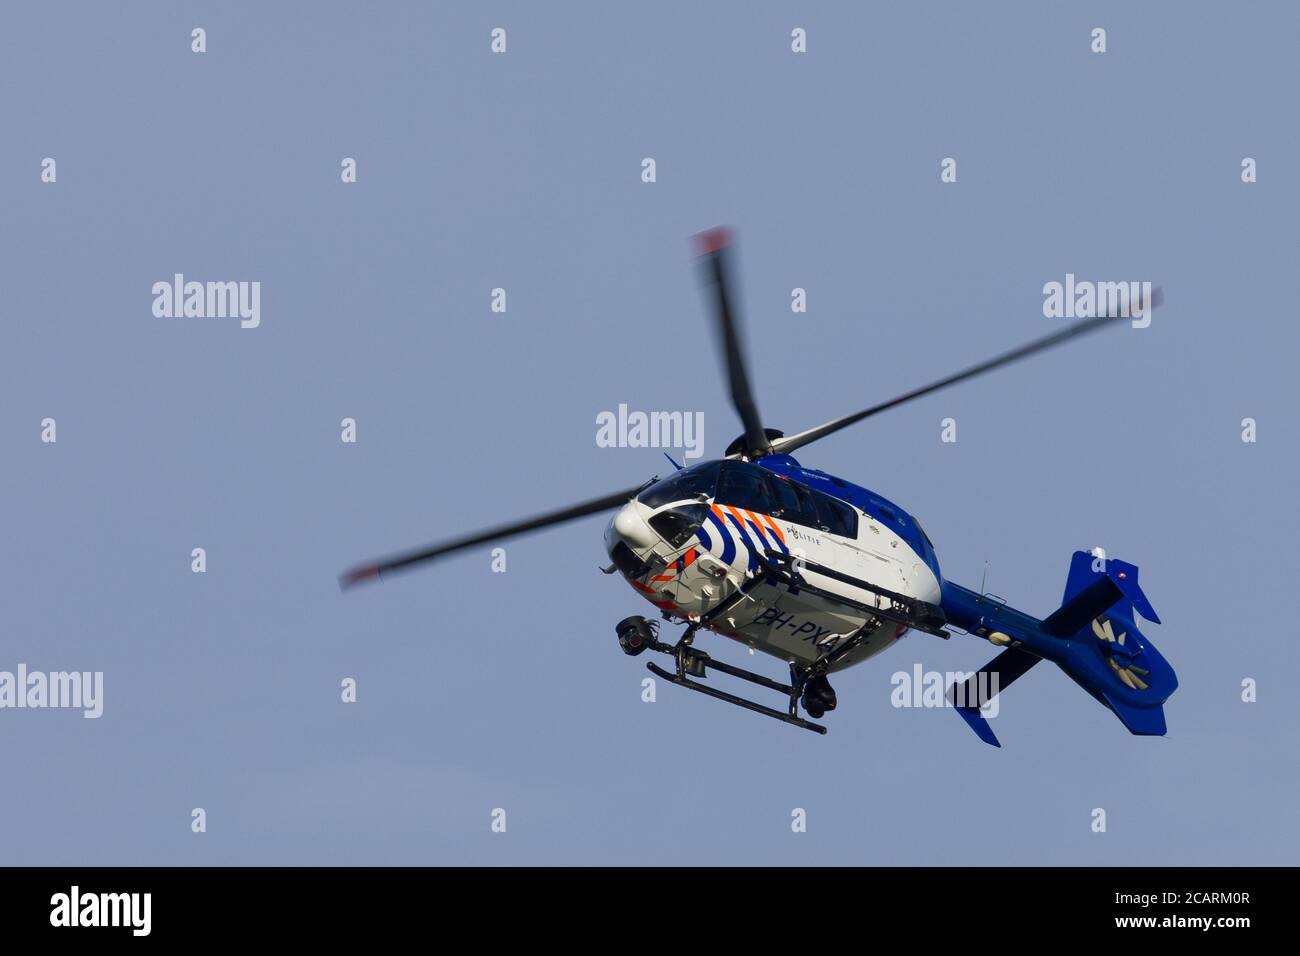 Kampen Netherlands May 26 2020: Dutch Police helicopter flying by searching for suspected criminals Stock Photo